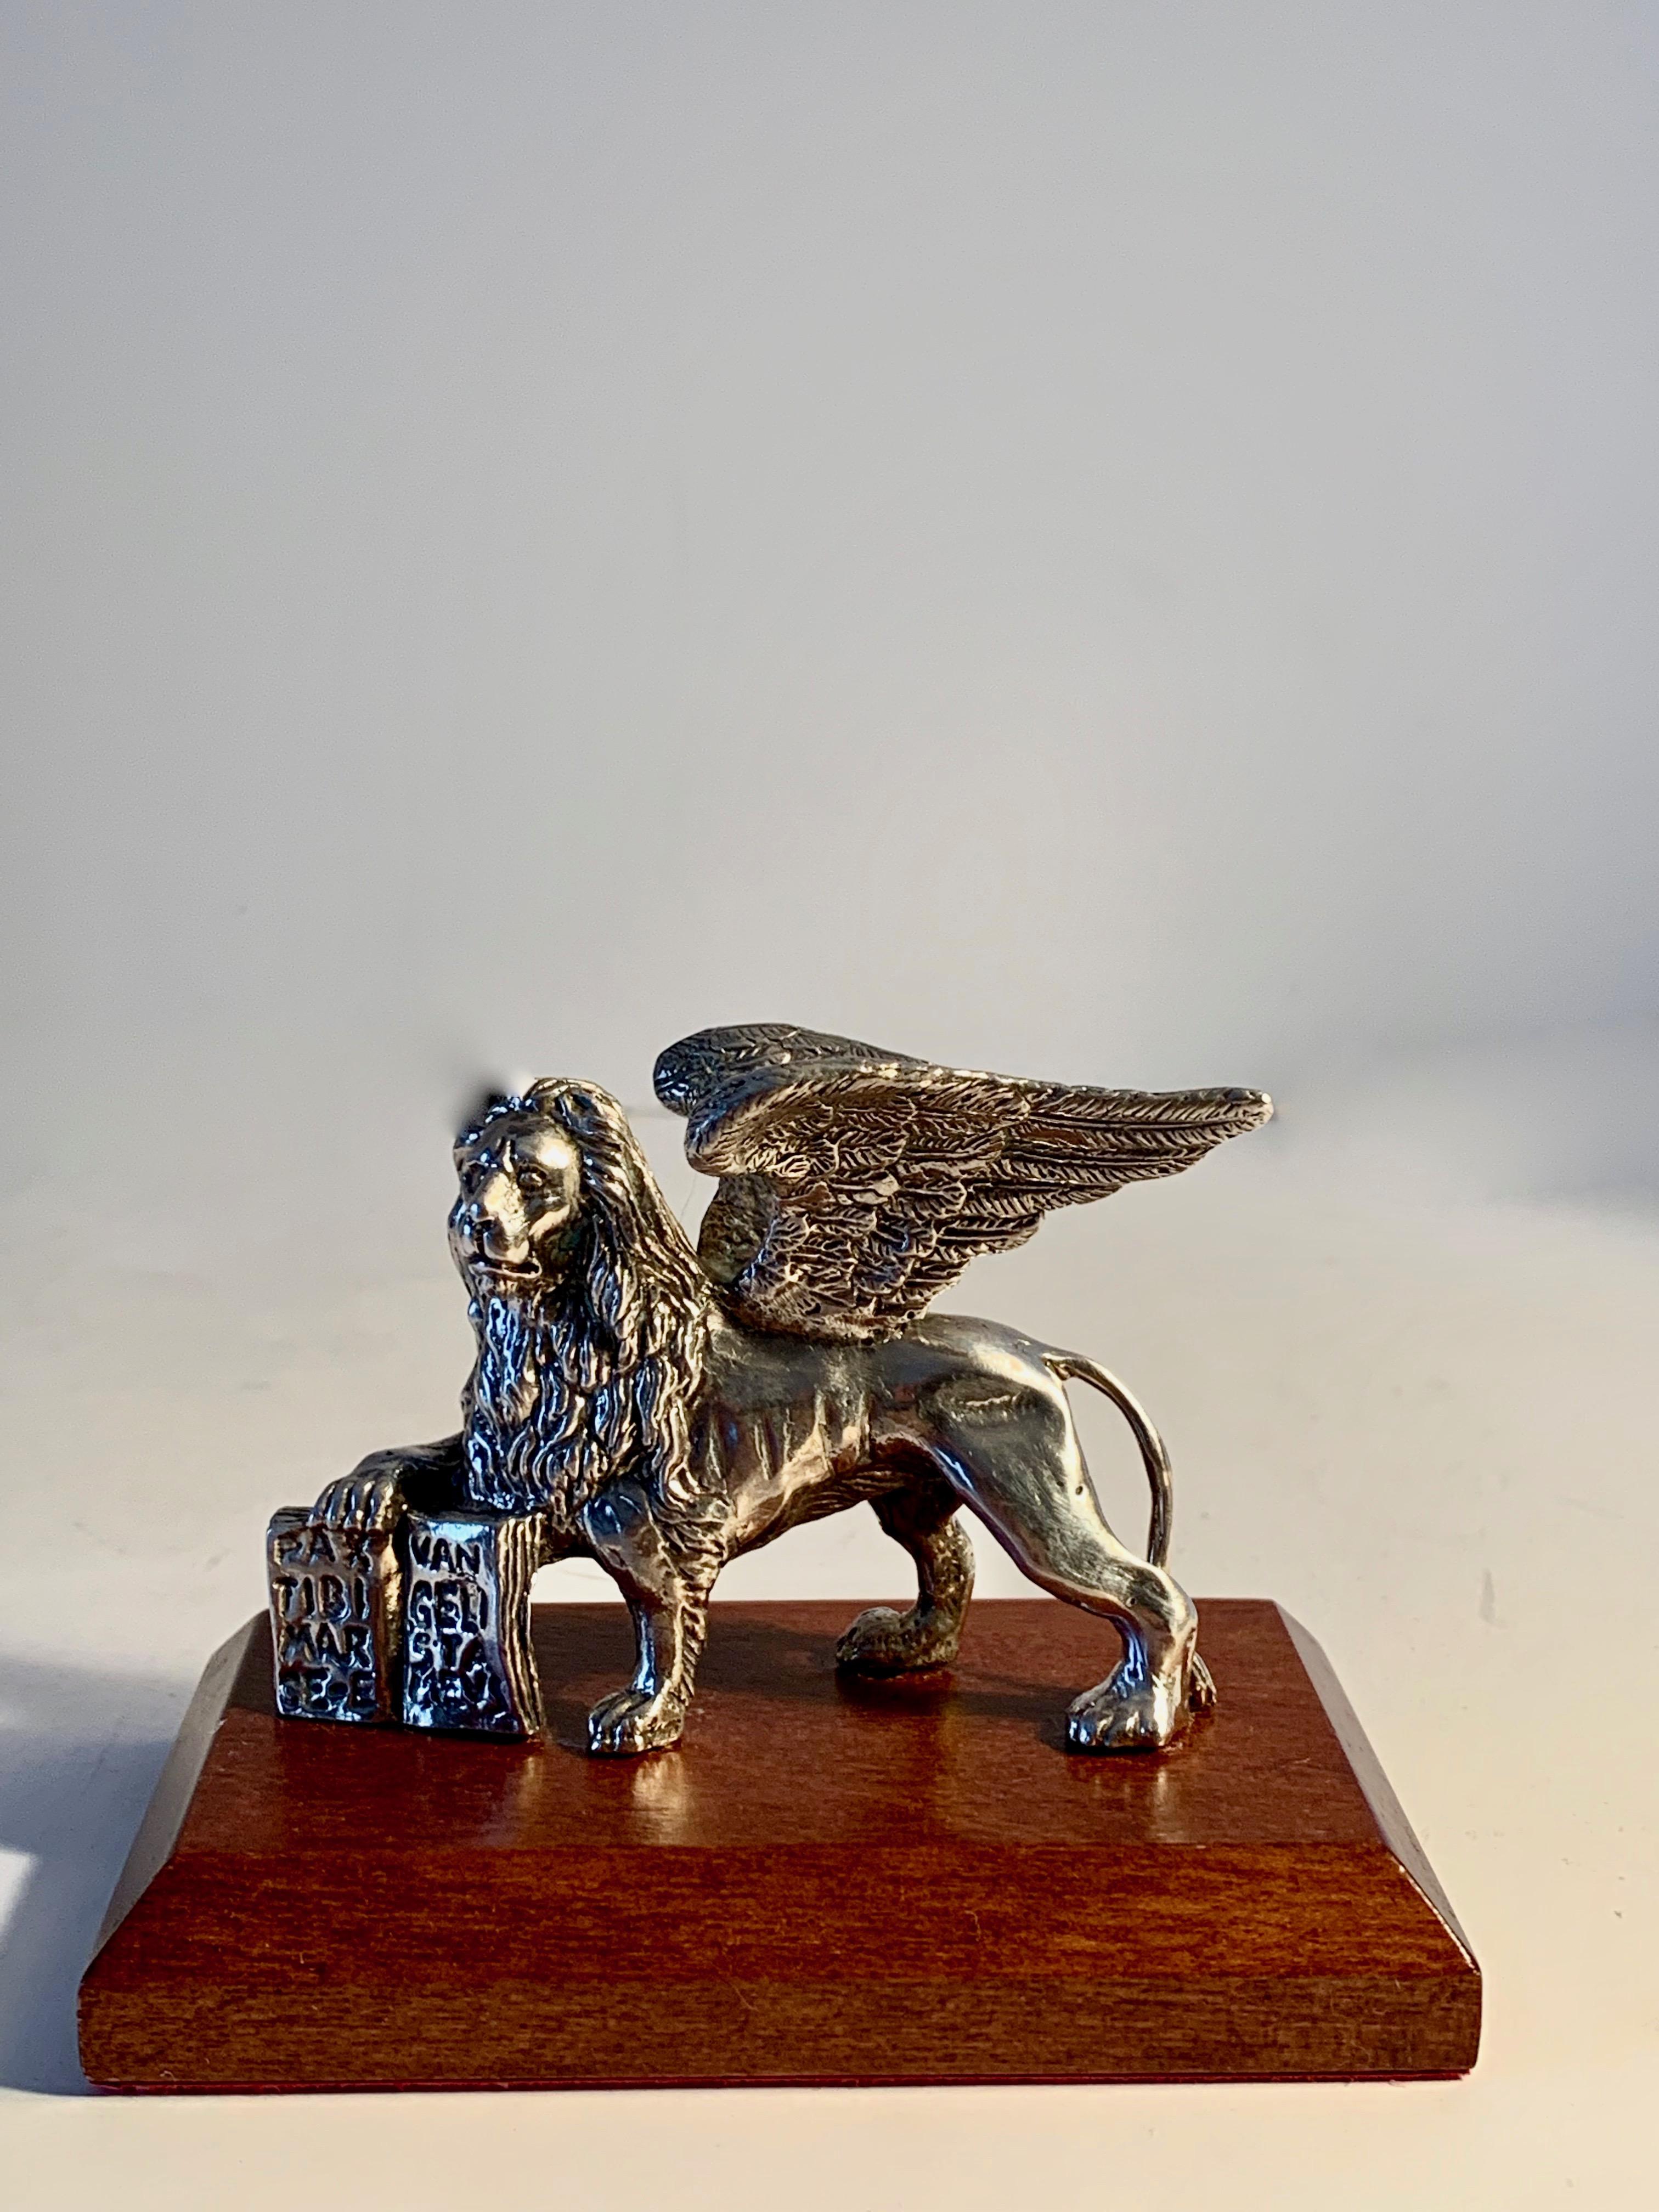 A Winged Lion of St Mark on wooden base, the lion has been tested and is solid sliver, standing on a wooden base the piece is a handsome bookmark, or decorative desk sculpture. A lovely and understated piece for any room

The Lion of Saint Mark,